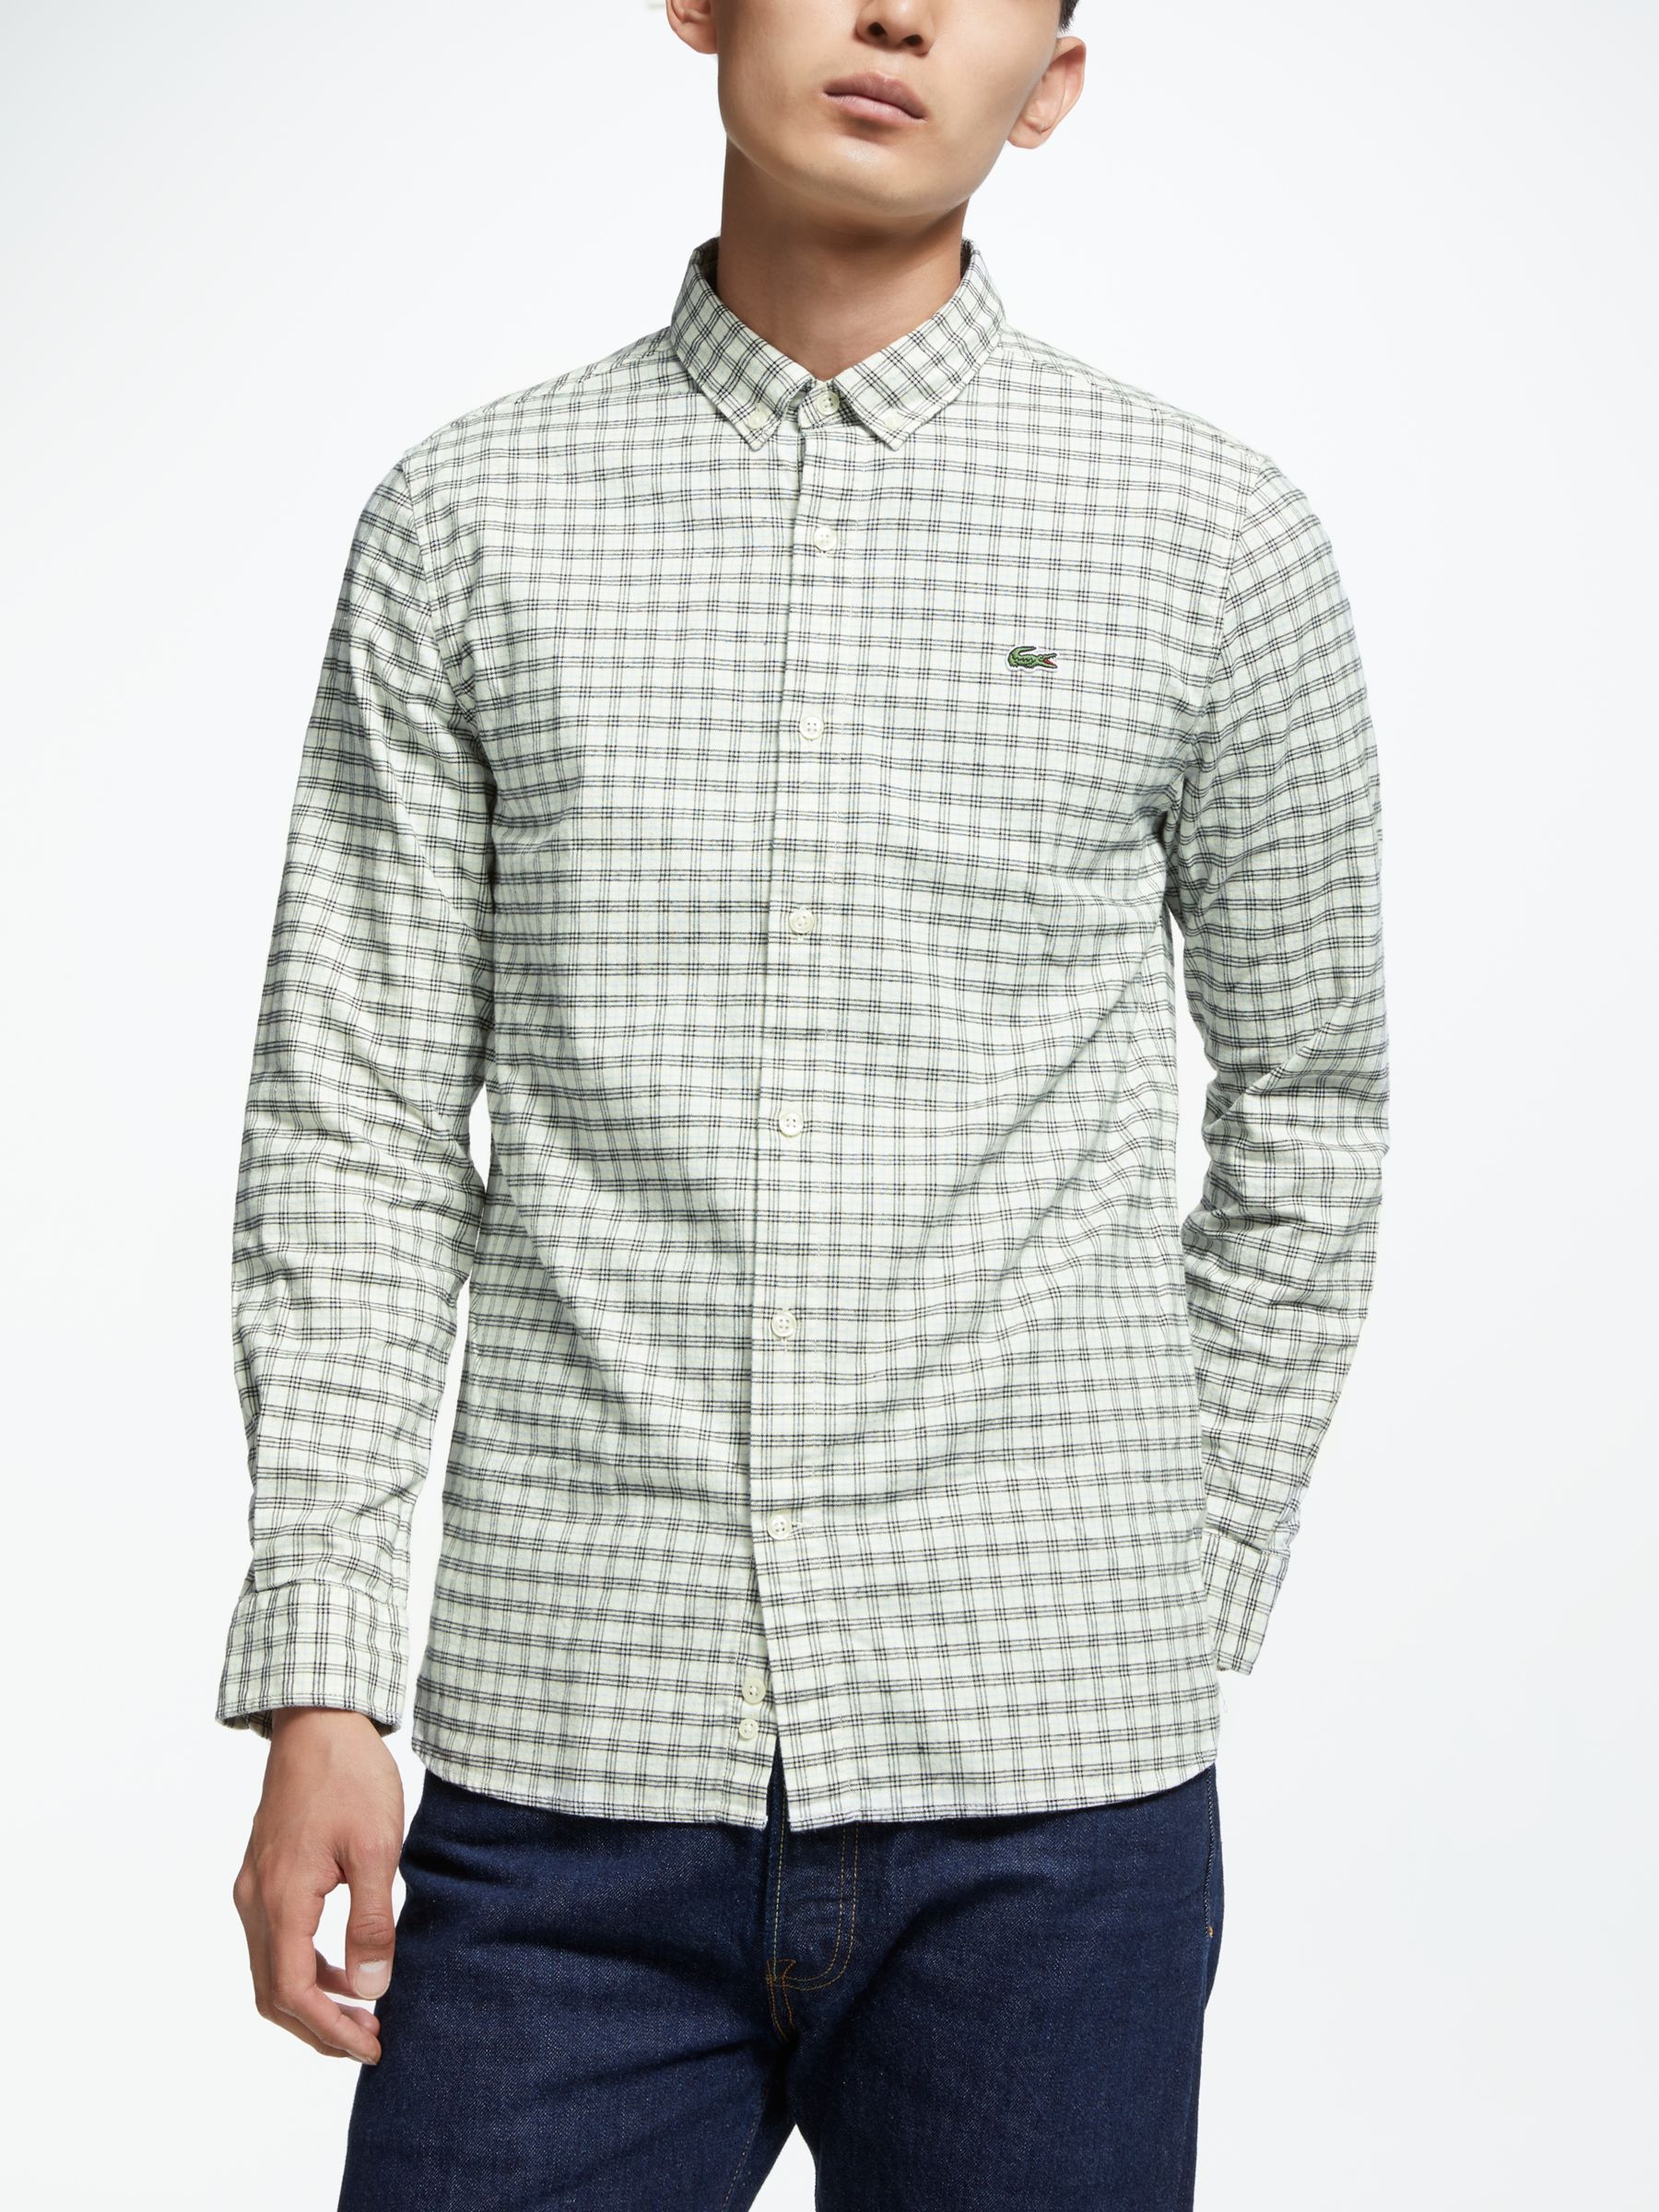 lacoste checkered shirt